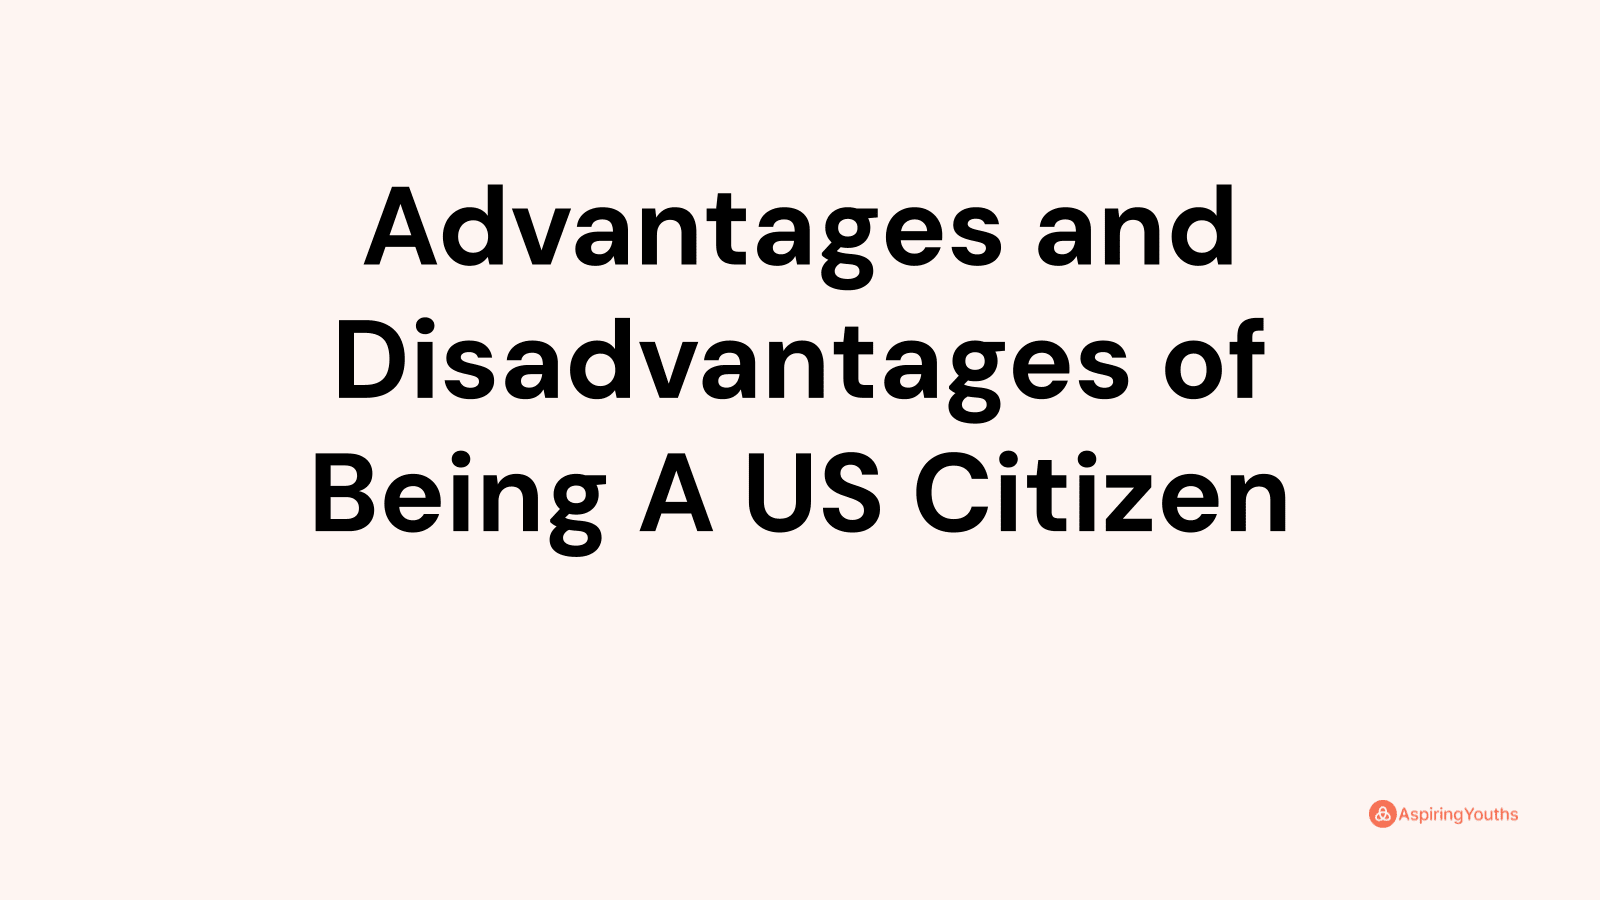 Advantages and disadvantages of Being A US Citizen